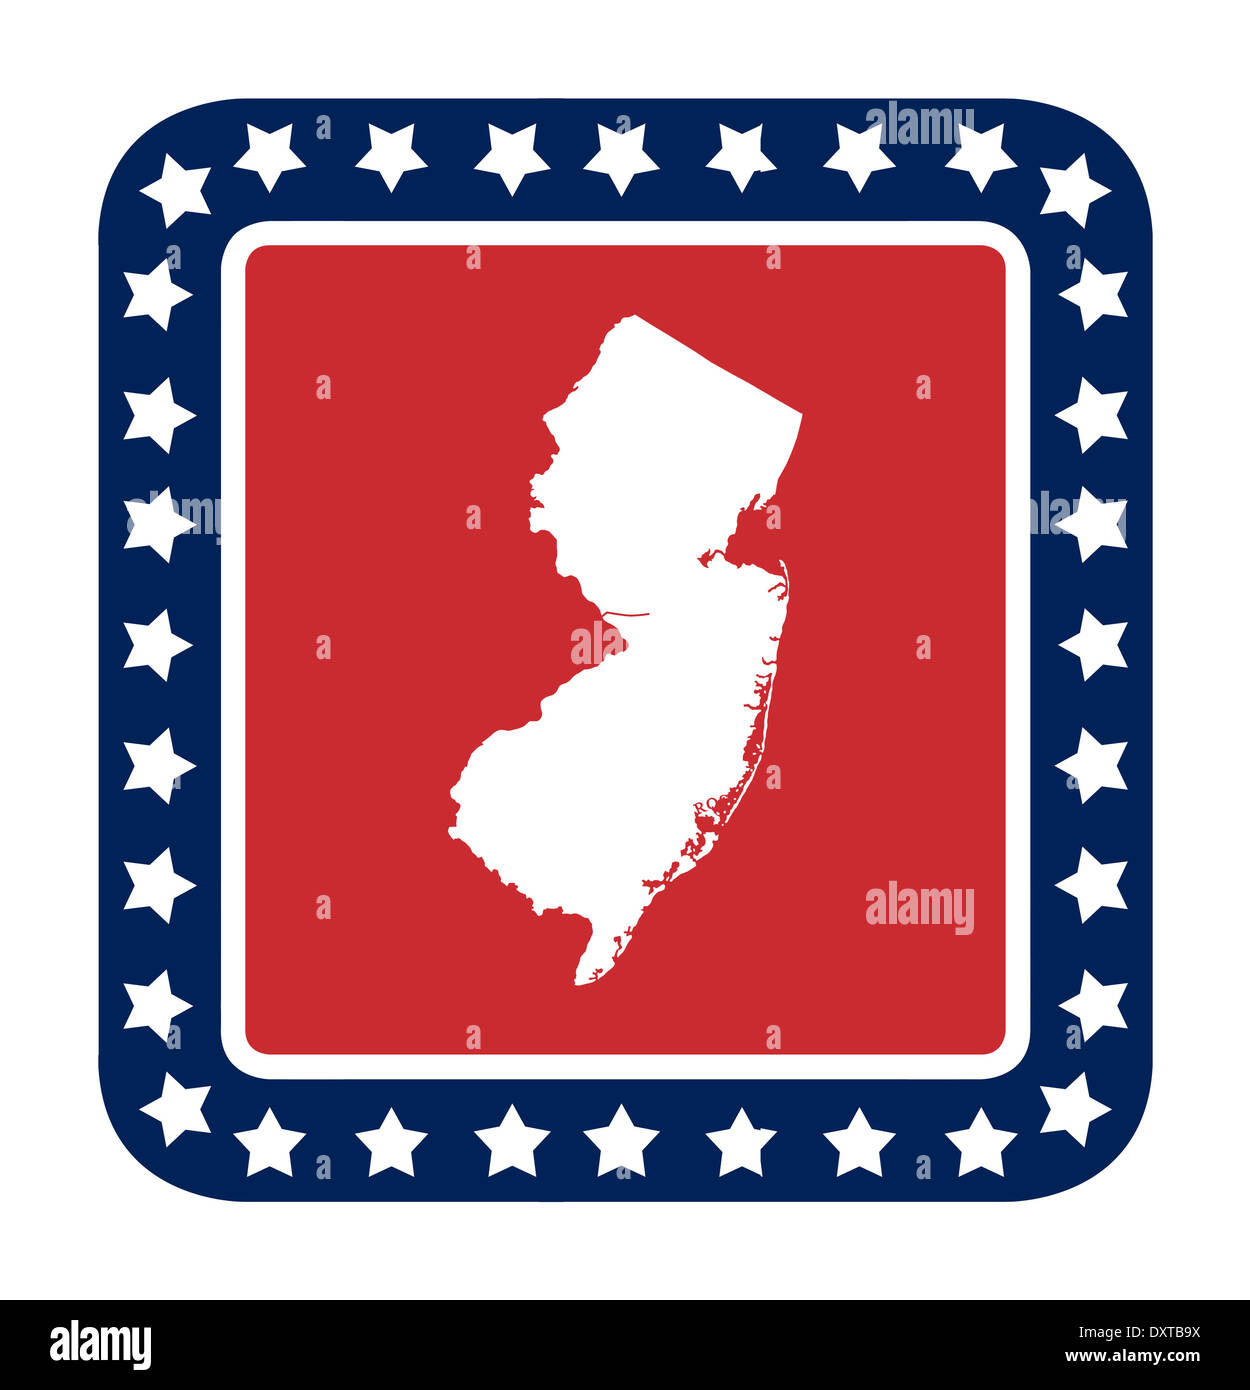 New Jersey state button on American flag in flat web design style, isolated on white background. Stock Photo